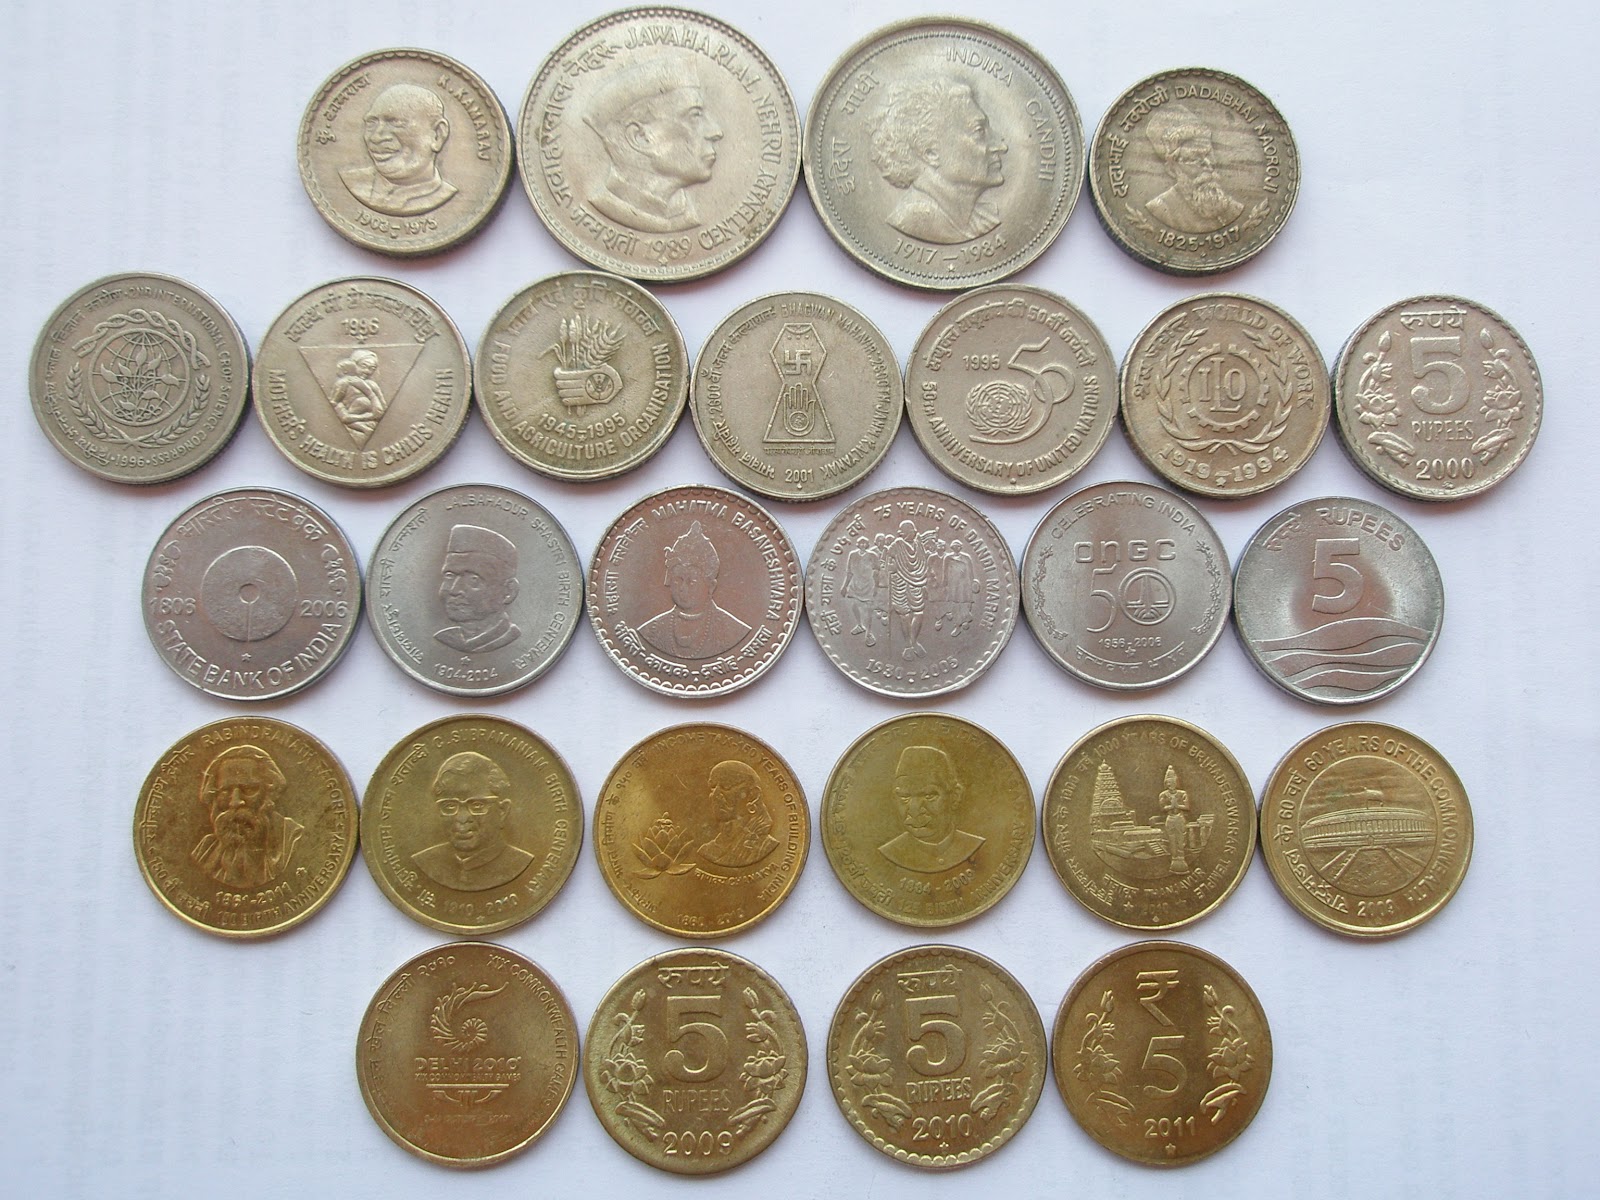 Raja's Coin Collection 5 Rupees coins of India